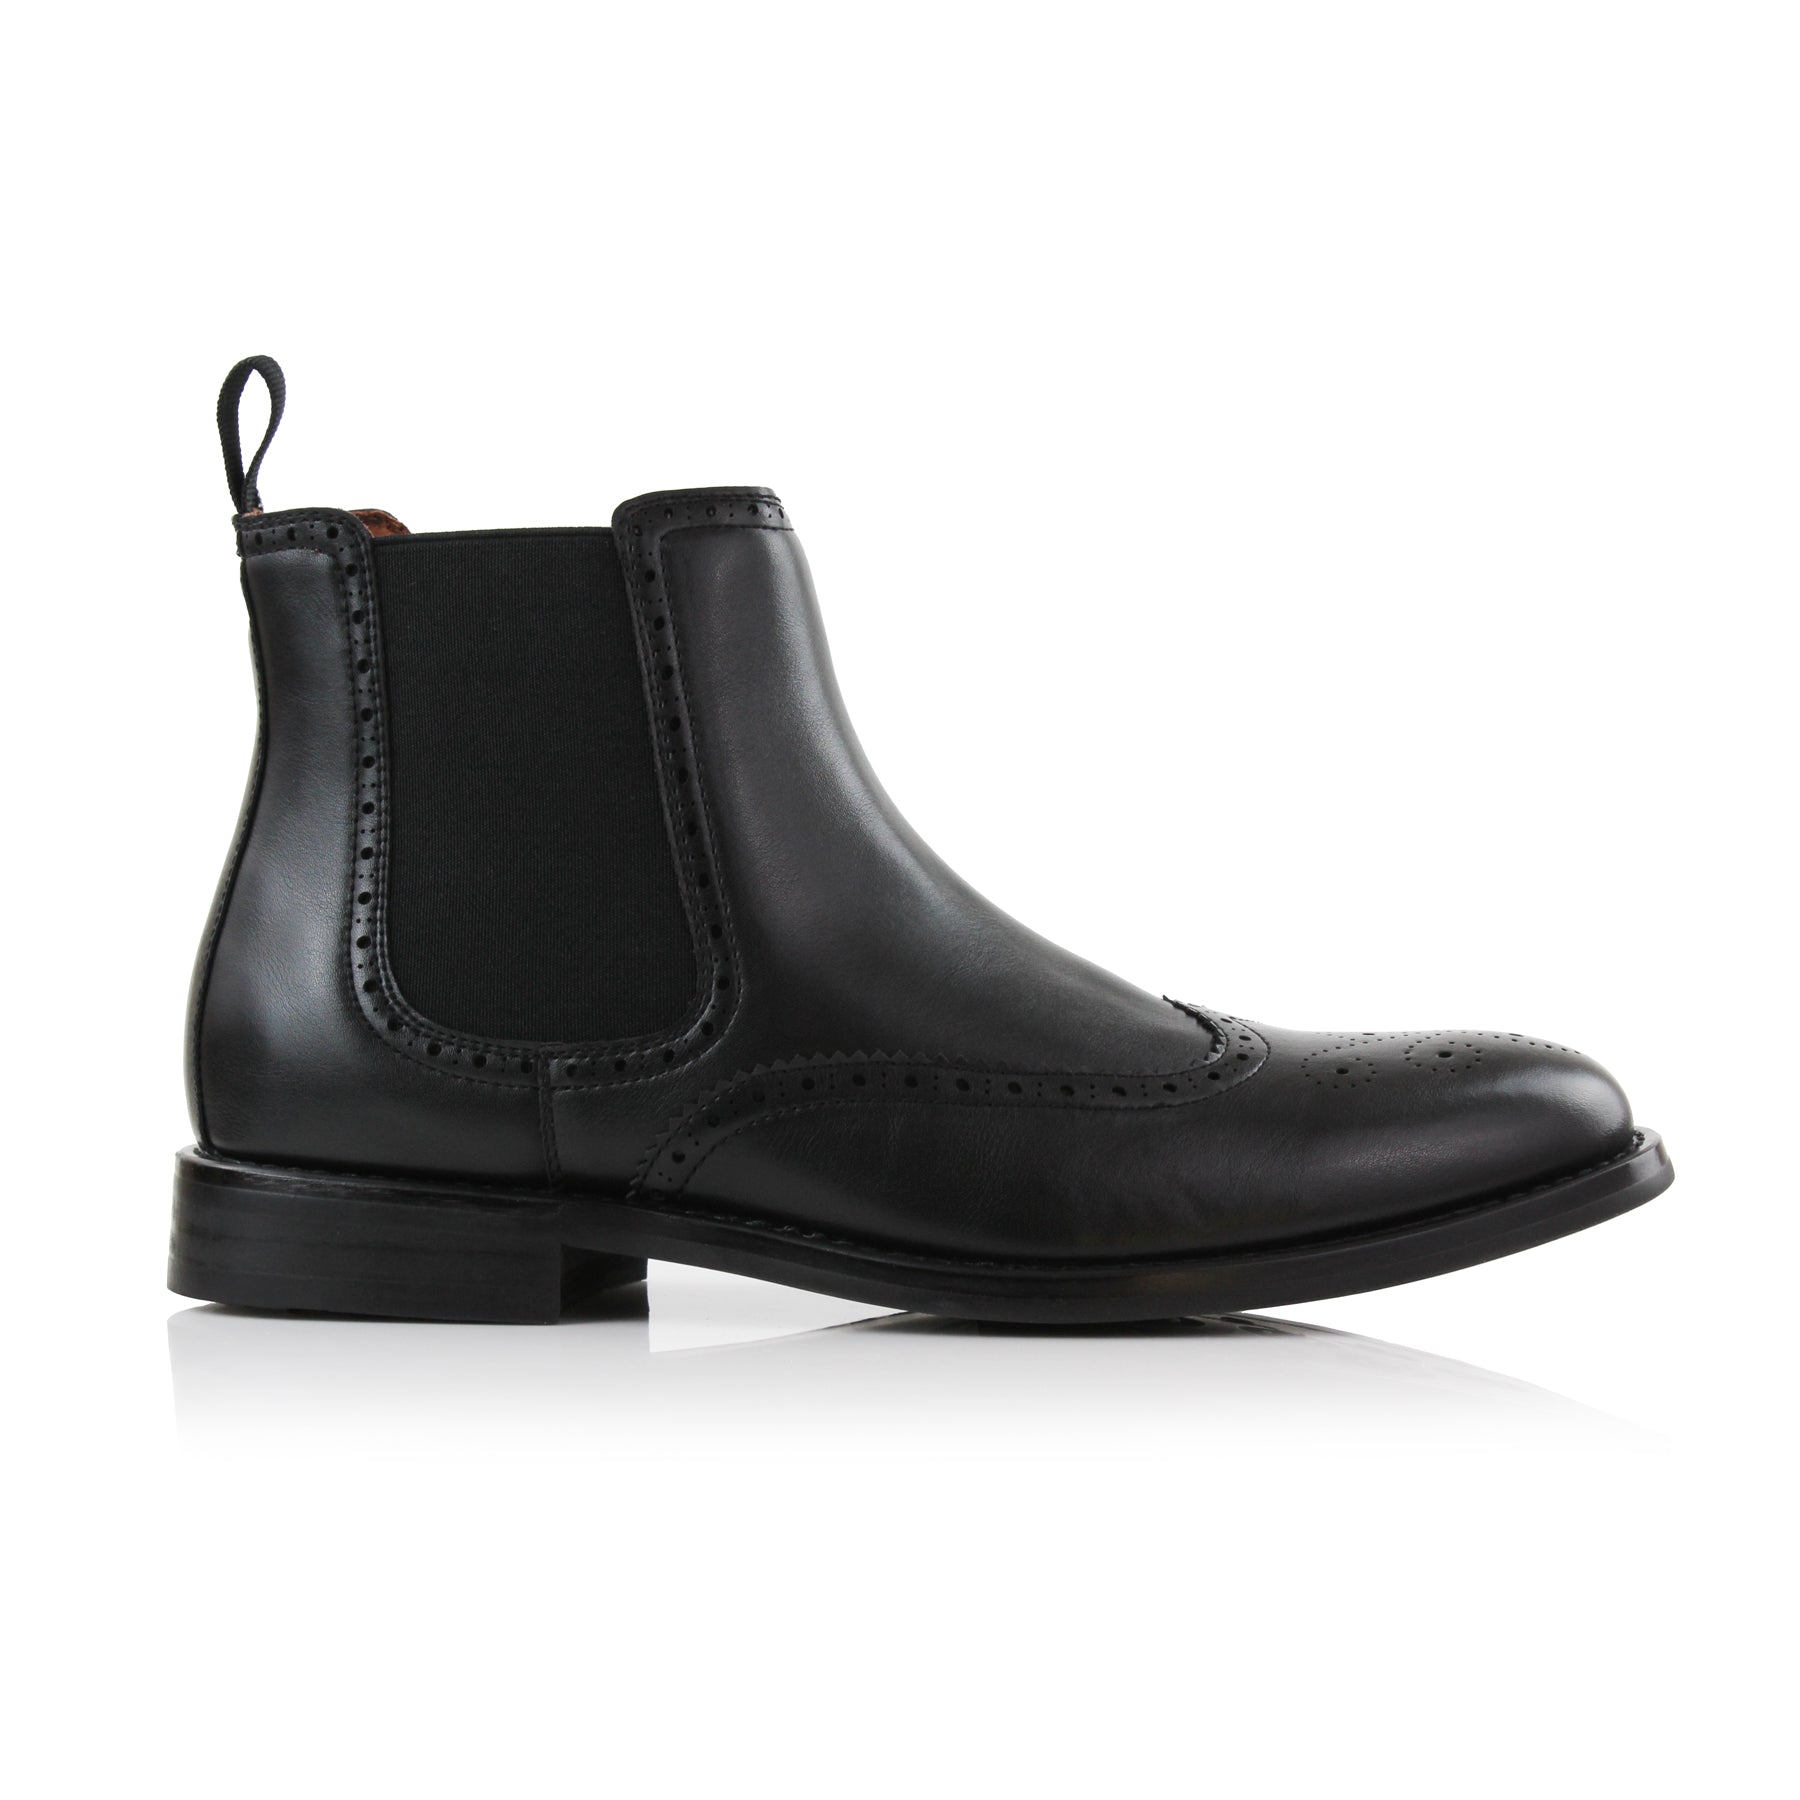 Brogue Wingtip Chelsea Boots | Alonzo by Ferro Aldo | Conal Footwear | Outer Side Angle View